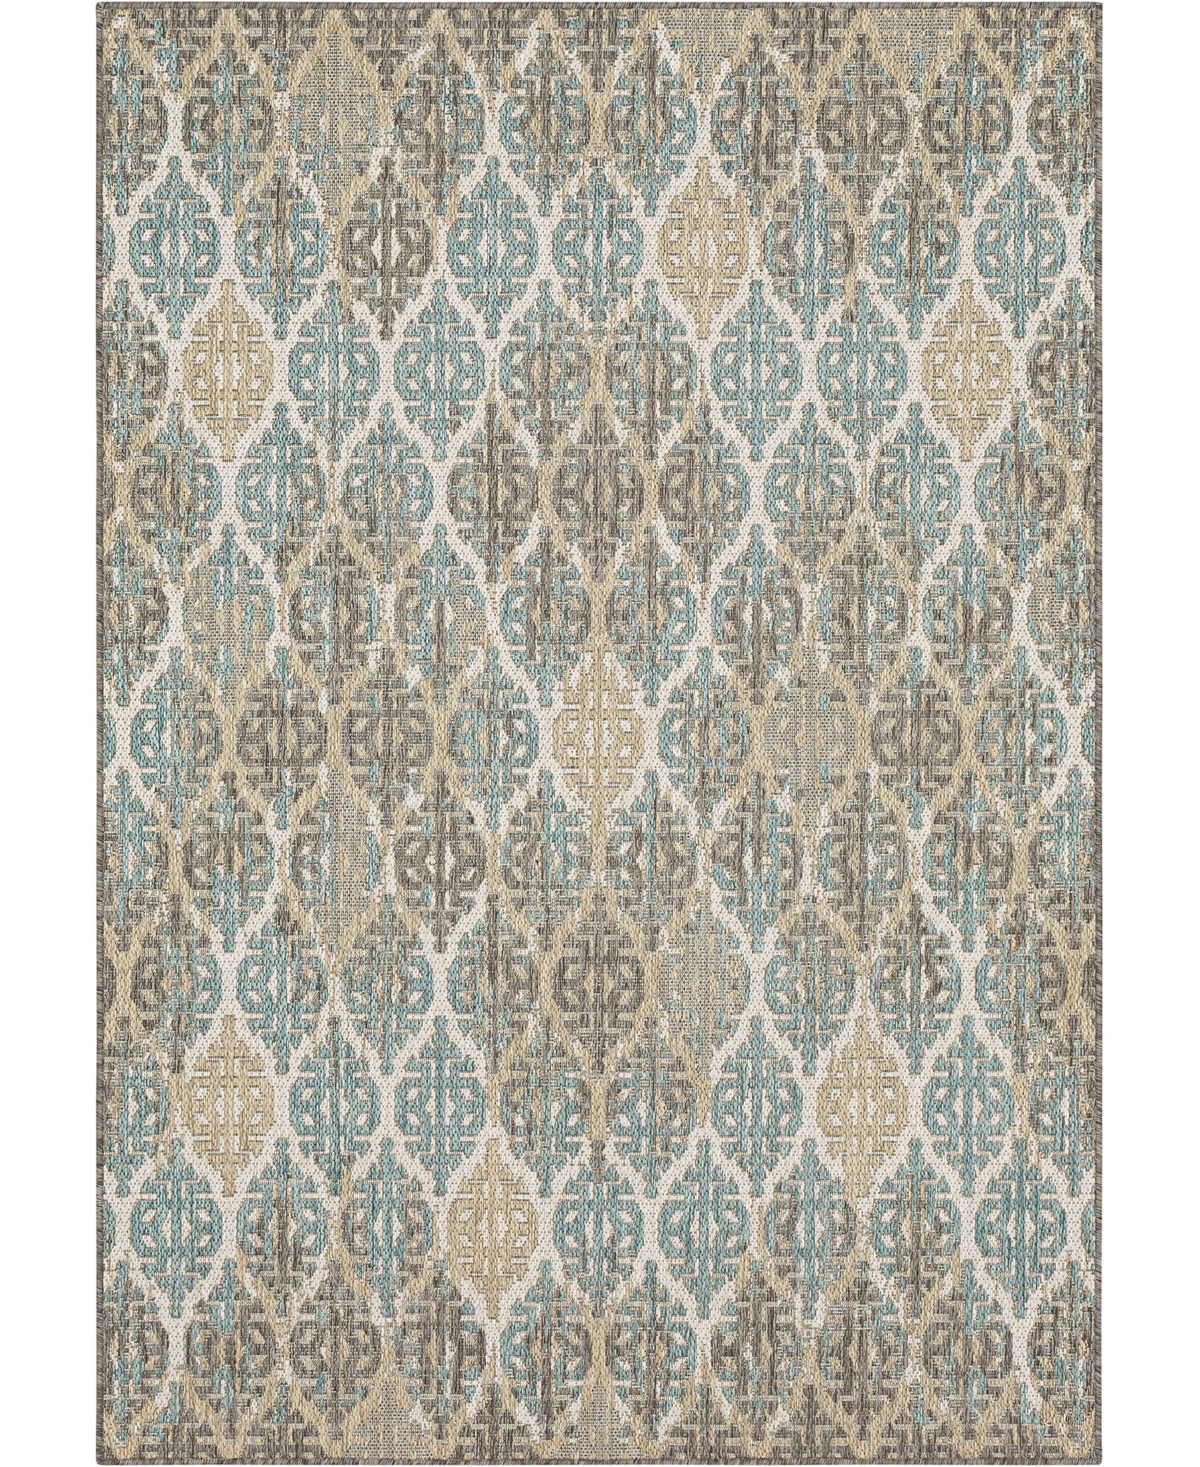 Mohawk Malibu Outdoor Stamped Ikat 4' X 5'6" Area Rug In Silver